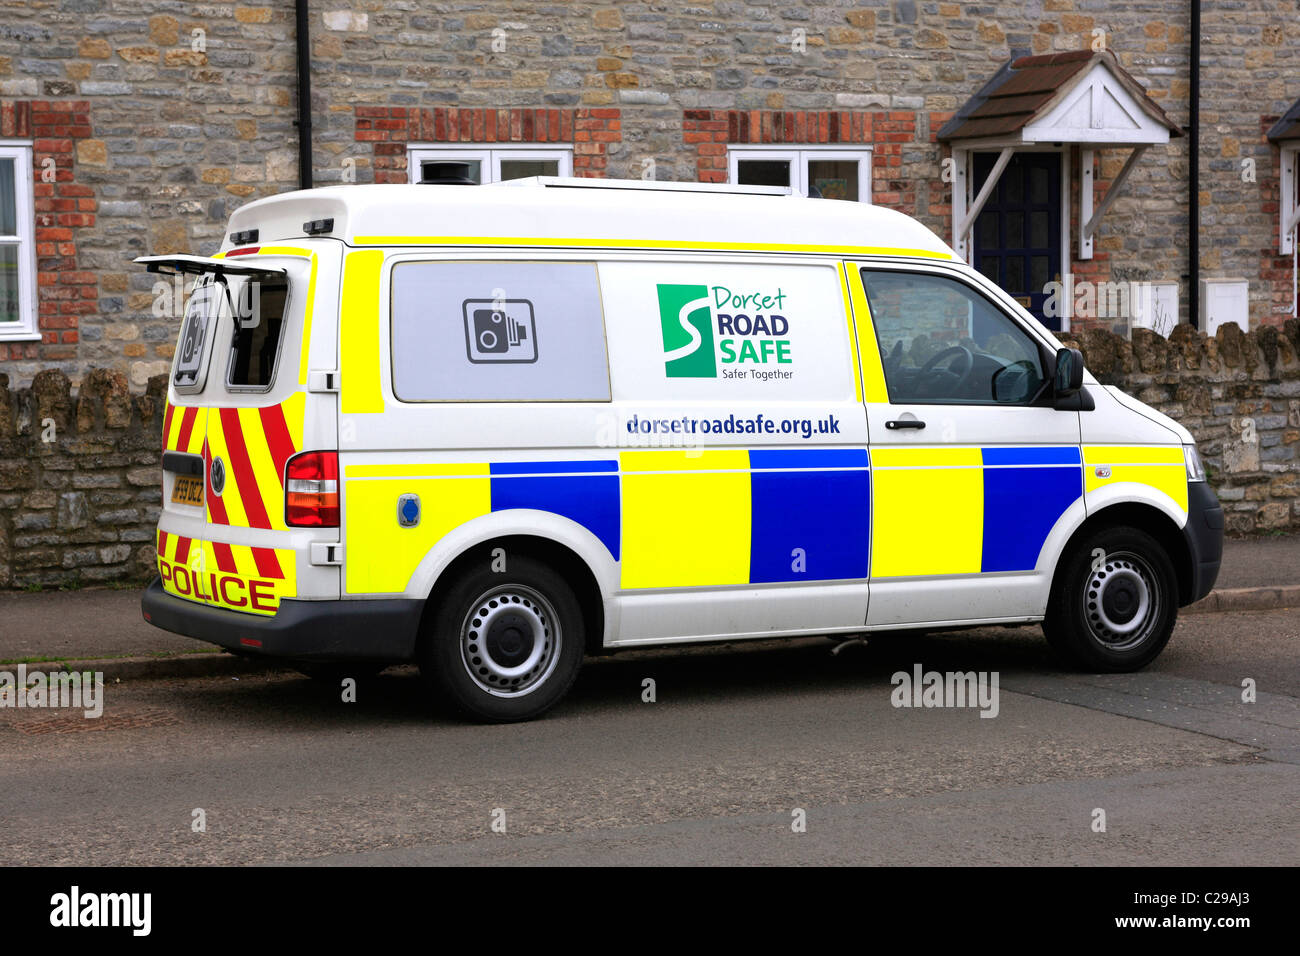 A Dorset Mobile Speed Camera Vehicle used for spot check on roads known for drivers who exceed the speed limits Stock Photo